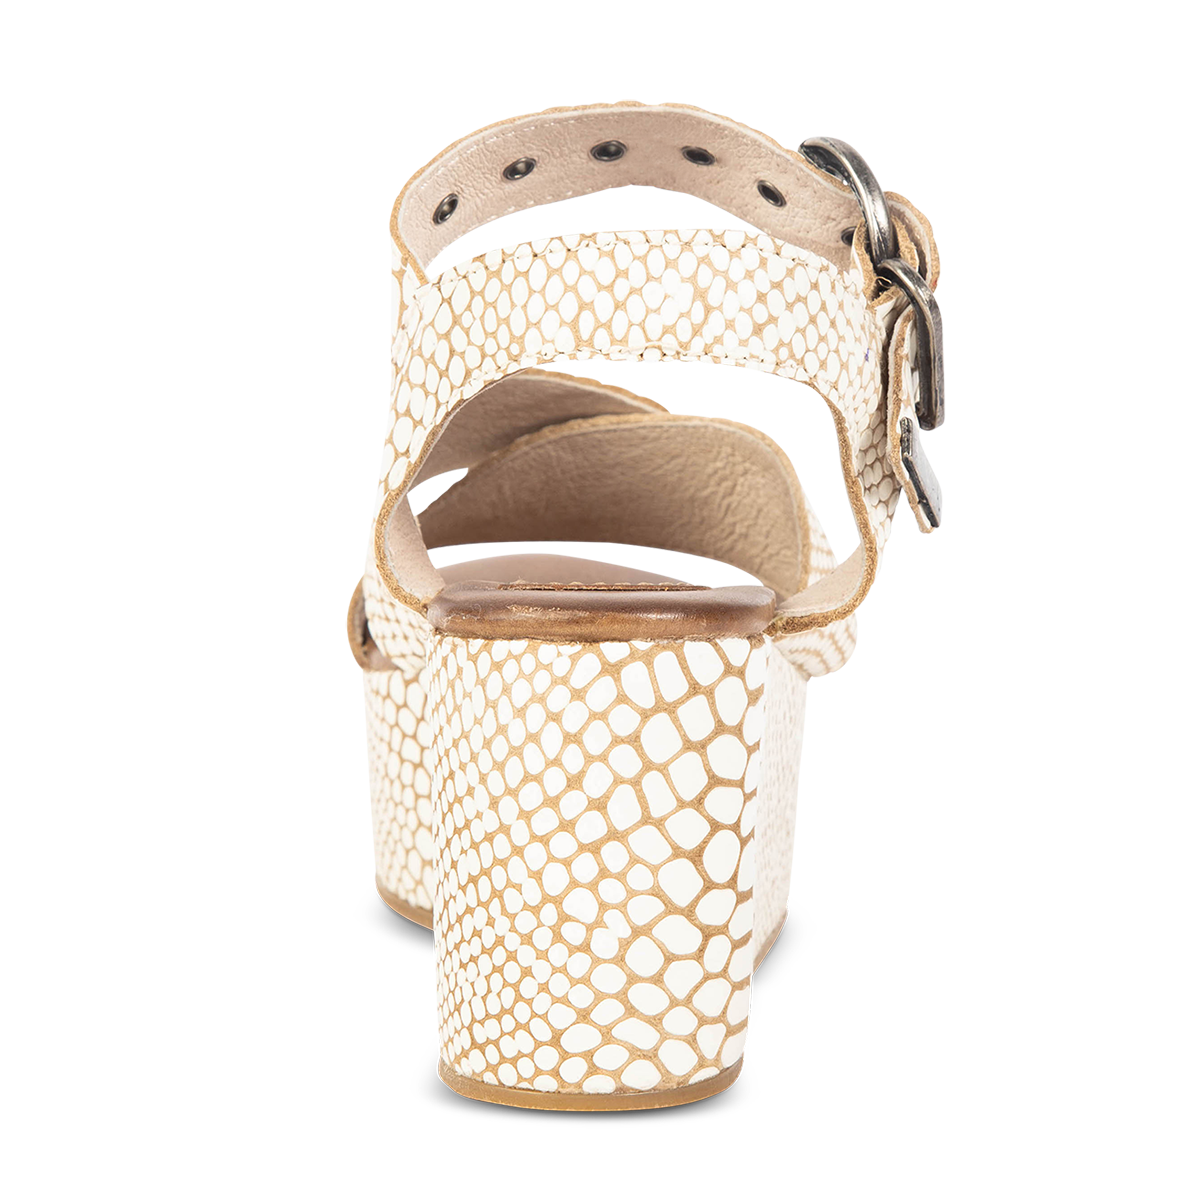 Back view showing heel on FREEBIRD women's Larae white snake wedge sandal with platform heel and an adjustable ankle strap